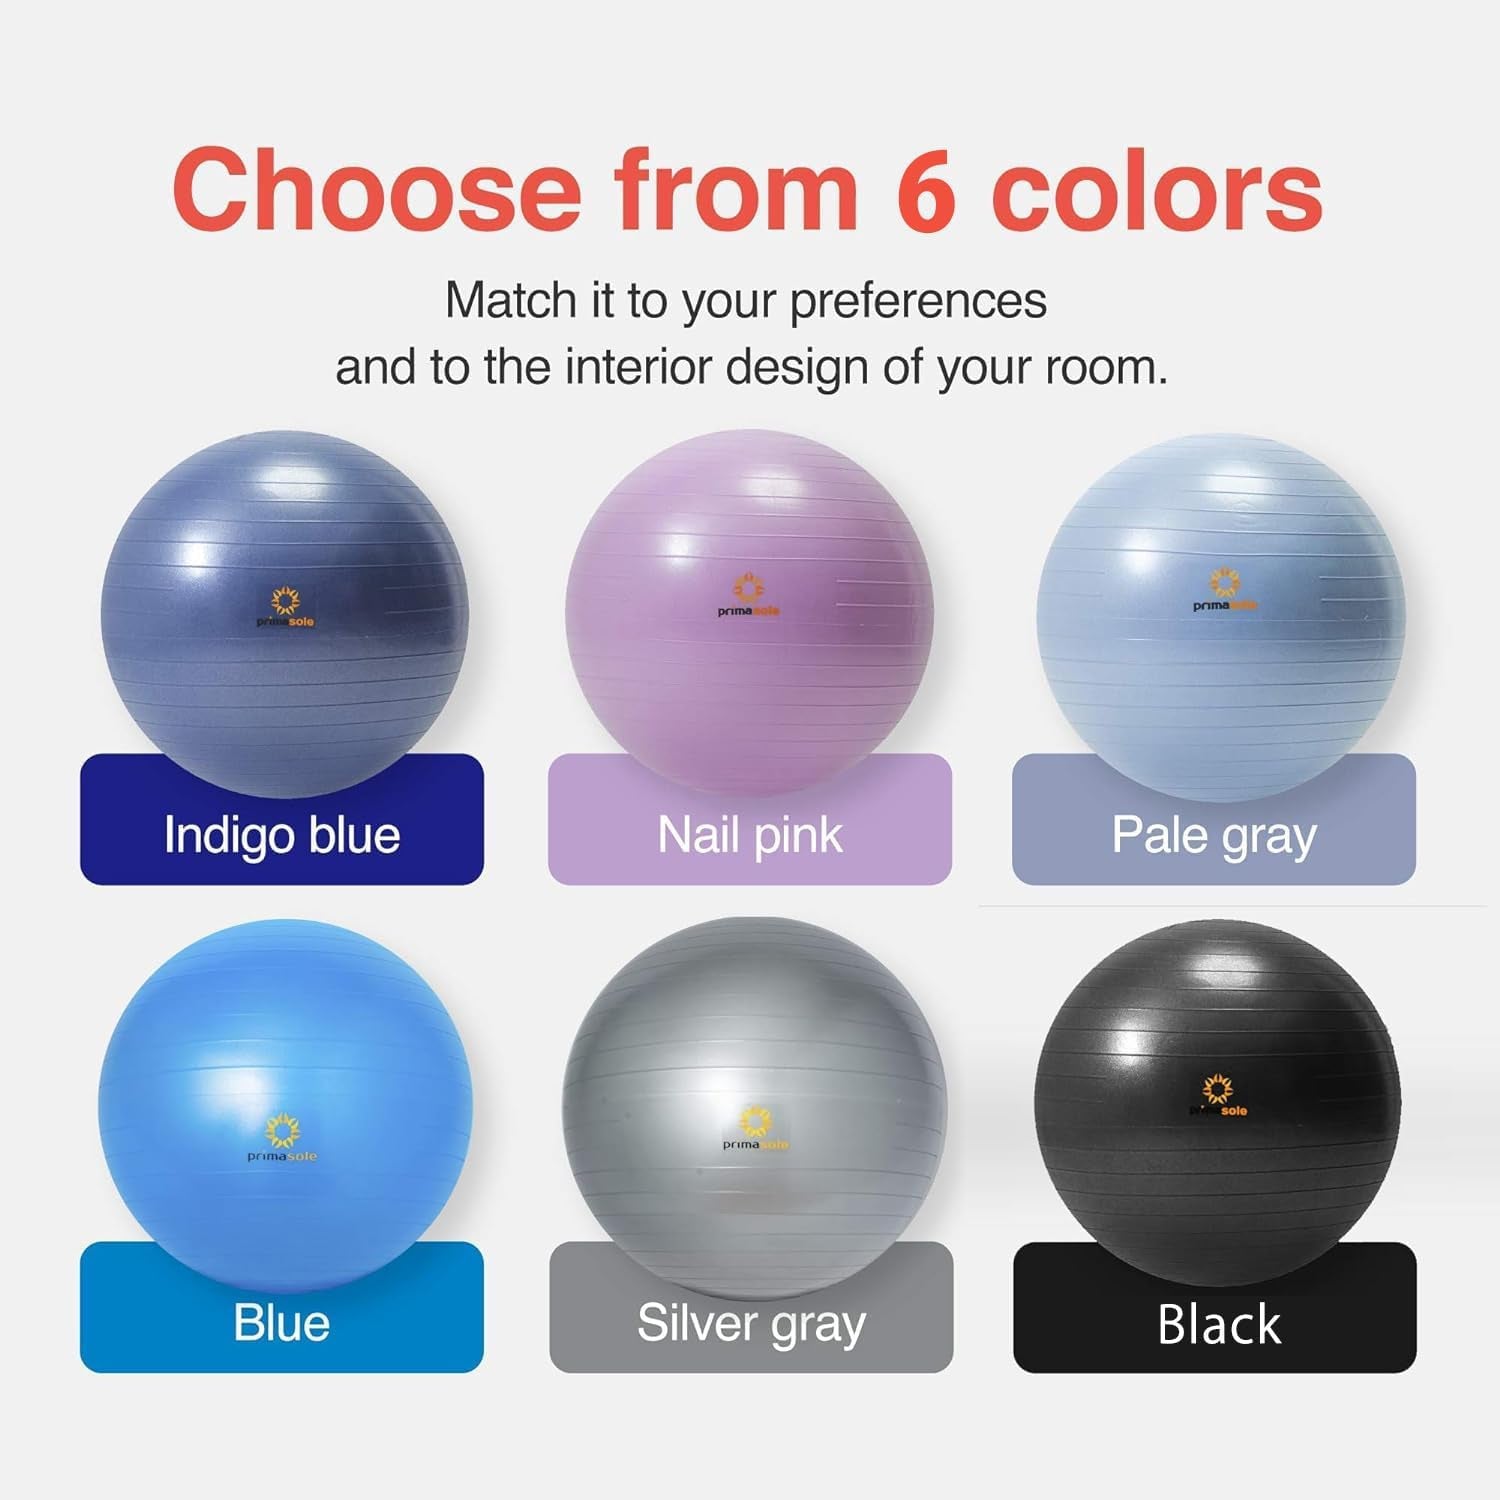 "Get Fit and Find Balance with Our Revolutionary Balance Ball!"